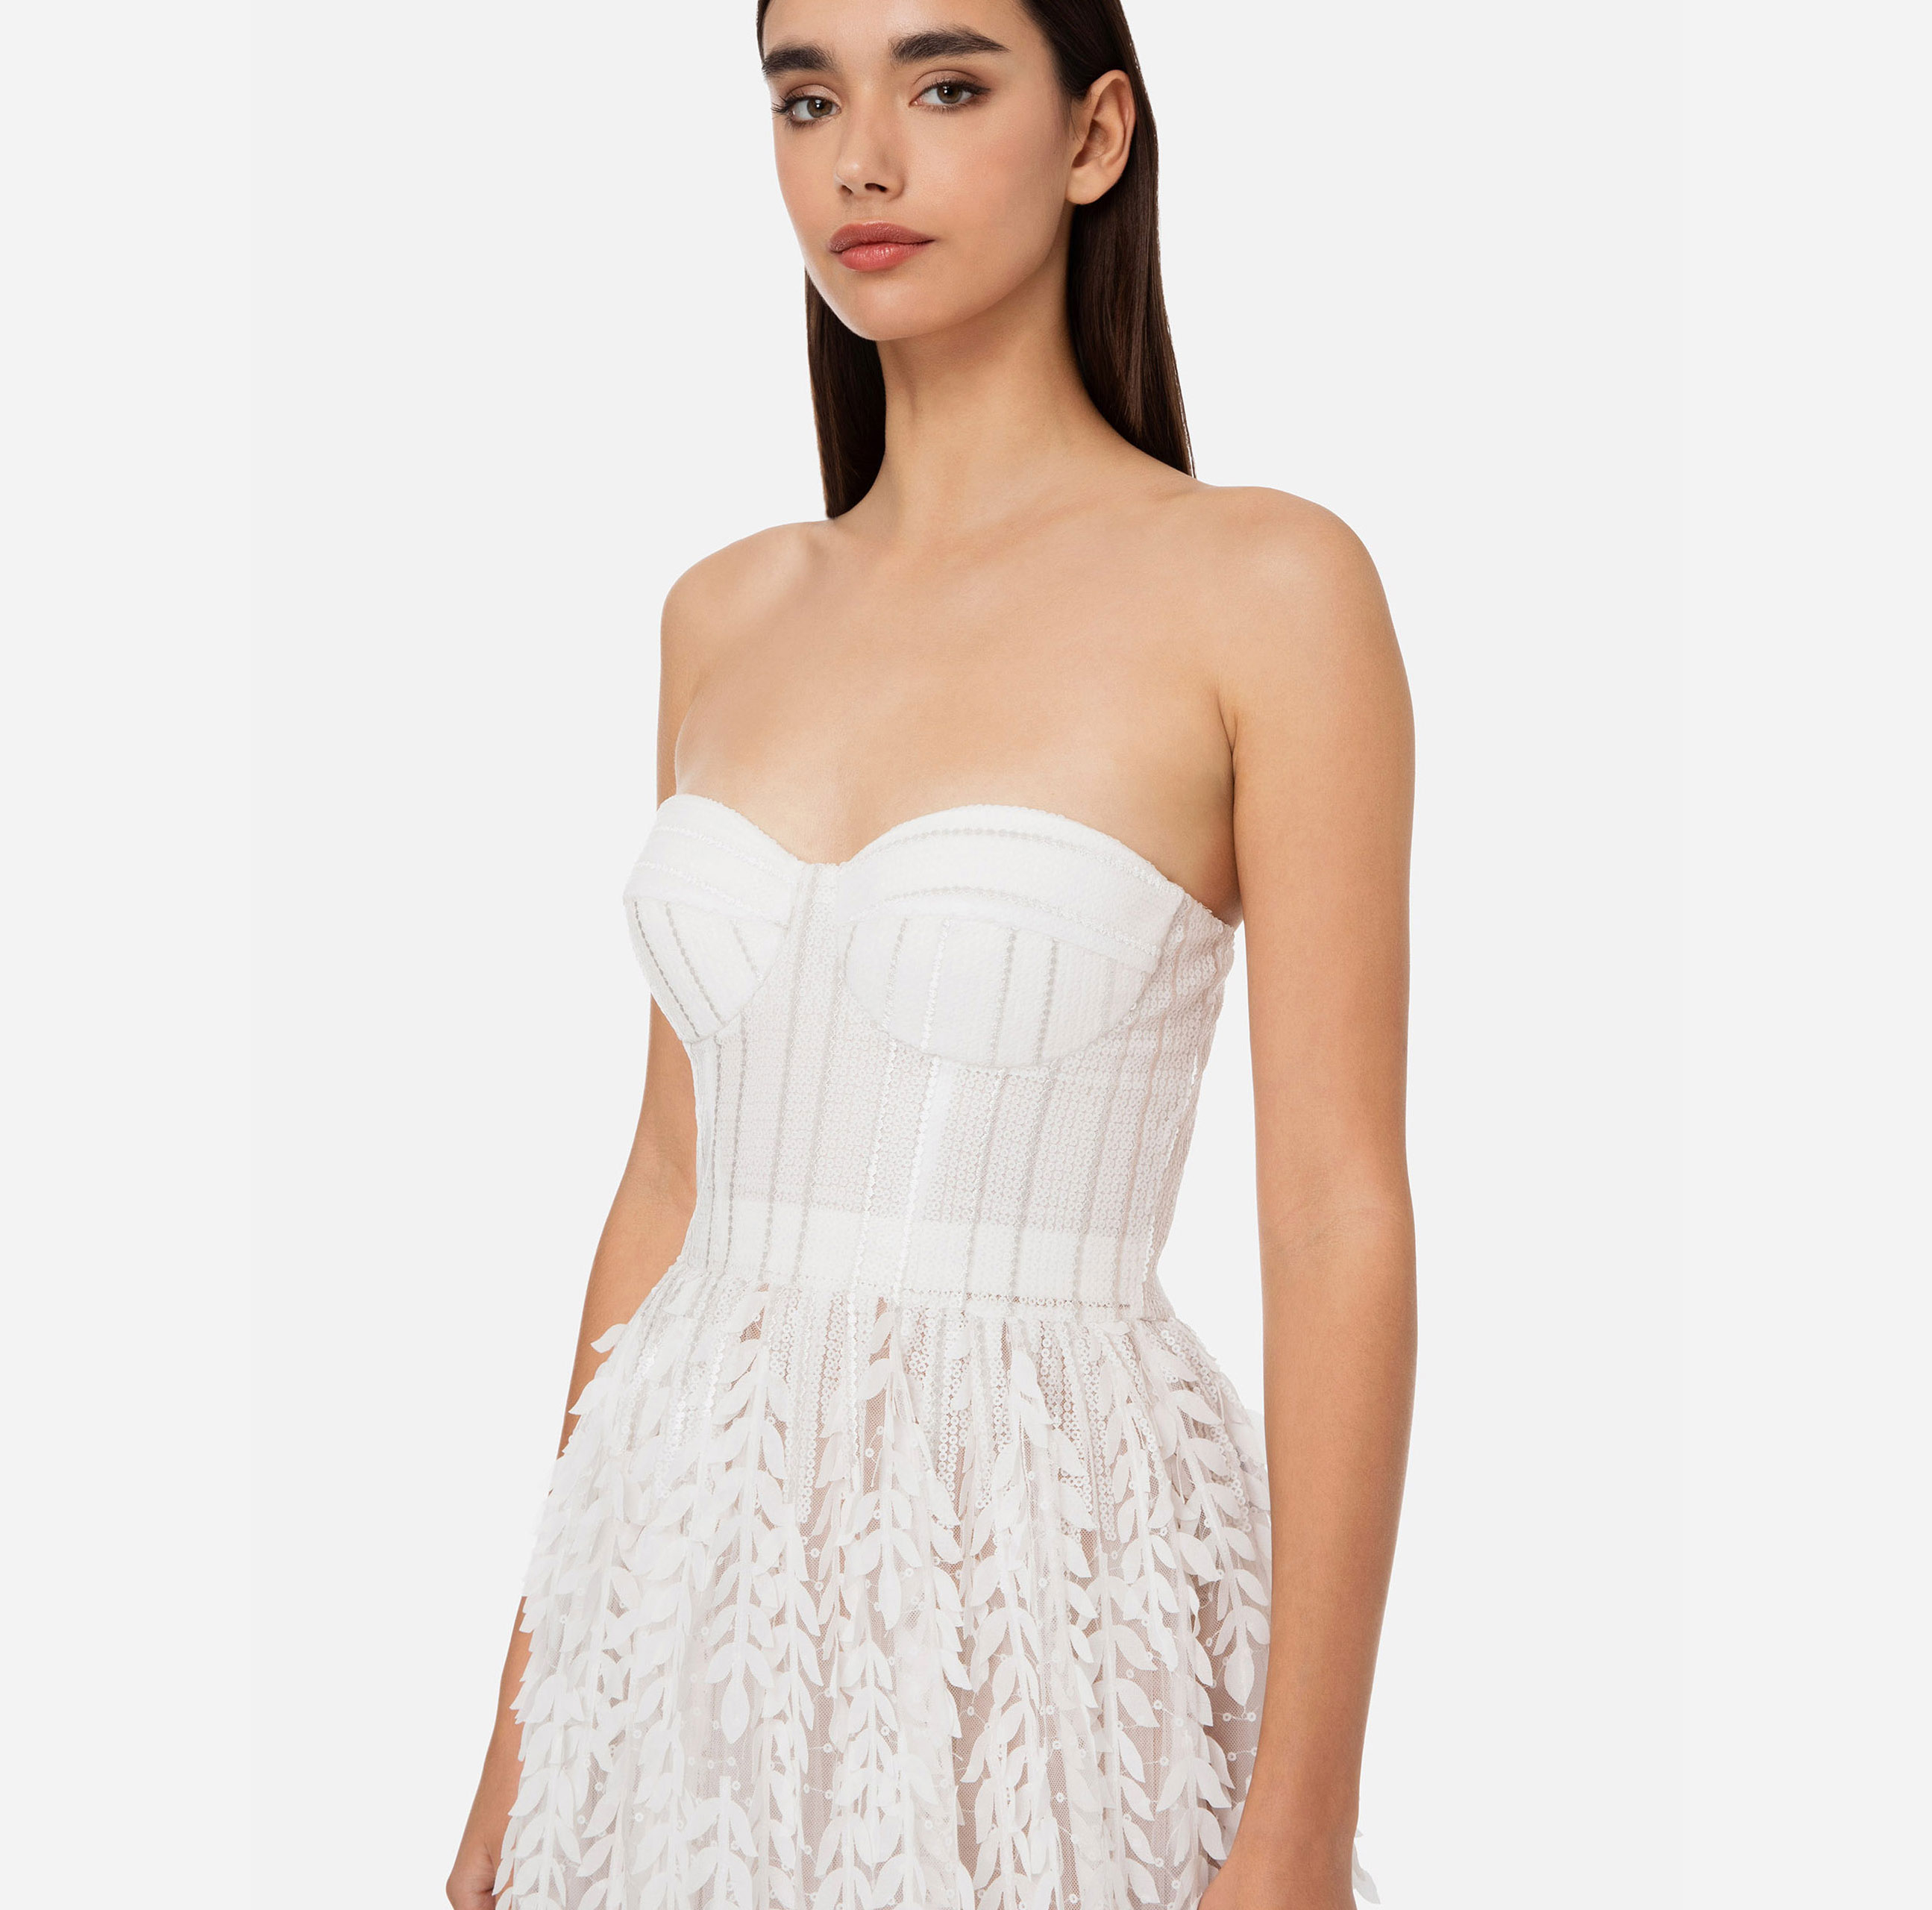 Red carpet dress with embroidered bustier top - Elisabetta Franchi